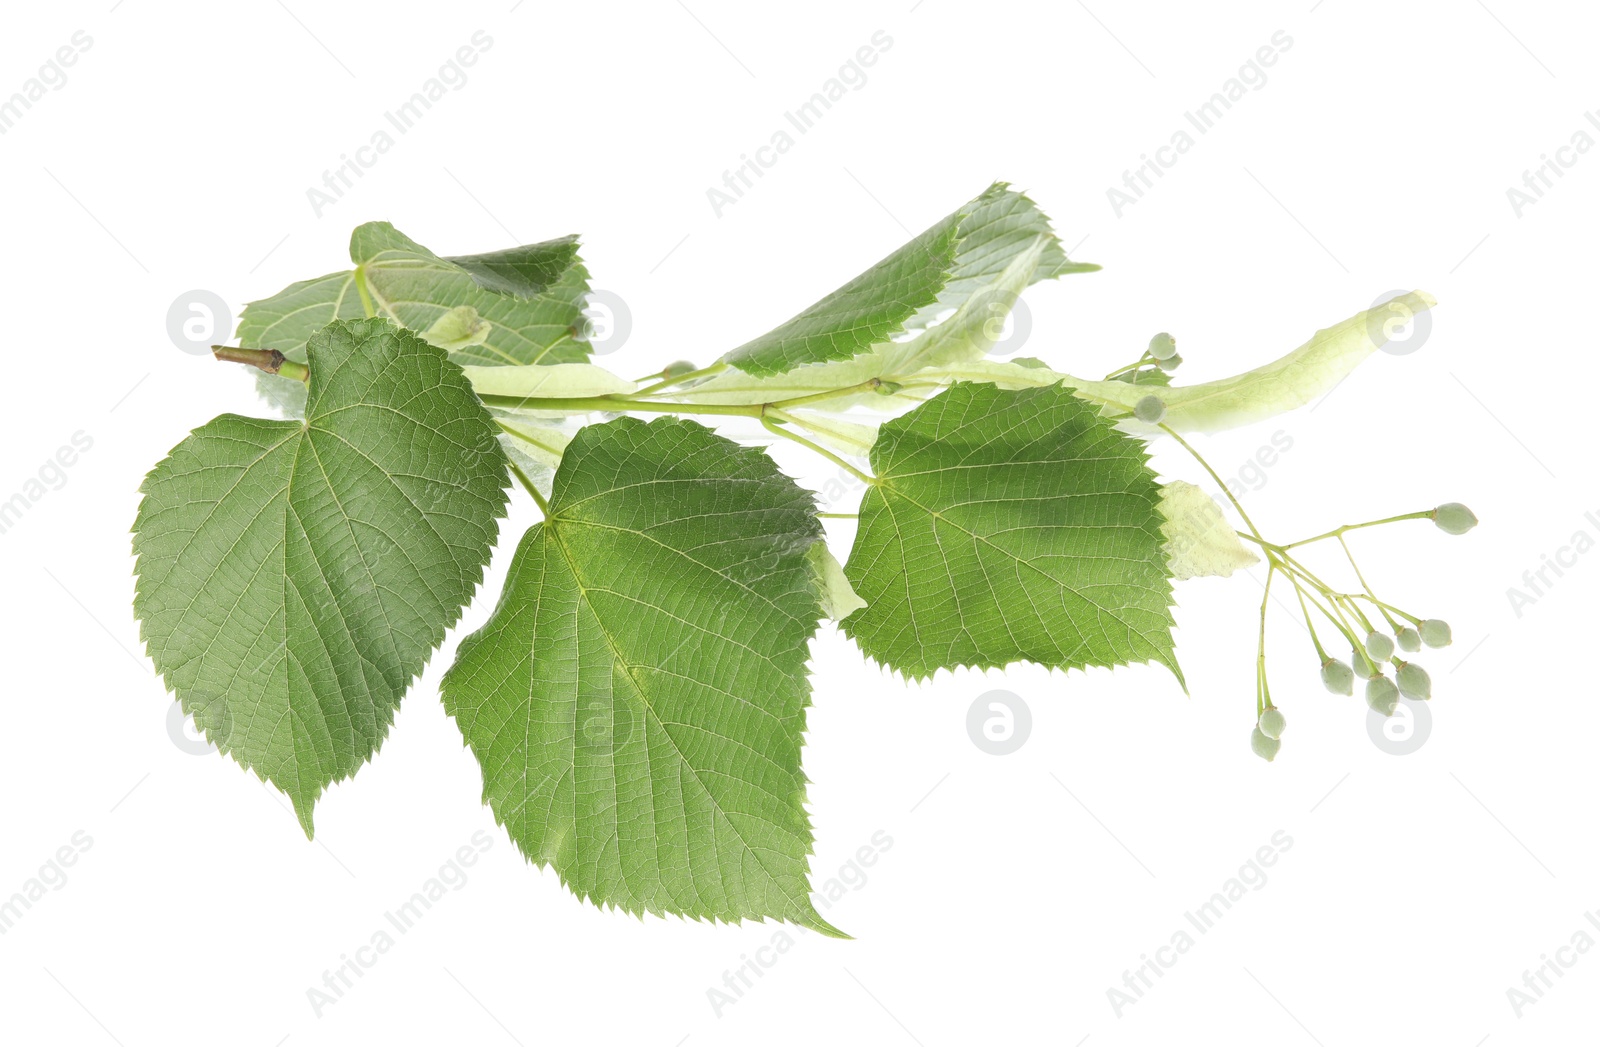 Photo of Branch of linden tree with young fresh green leaves and blossom isolated on white. Spring season